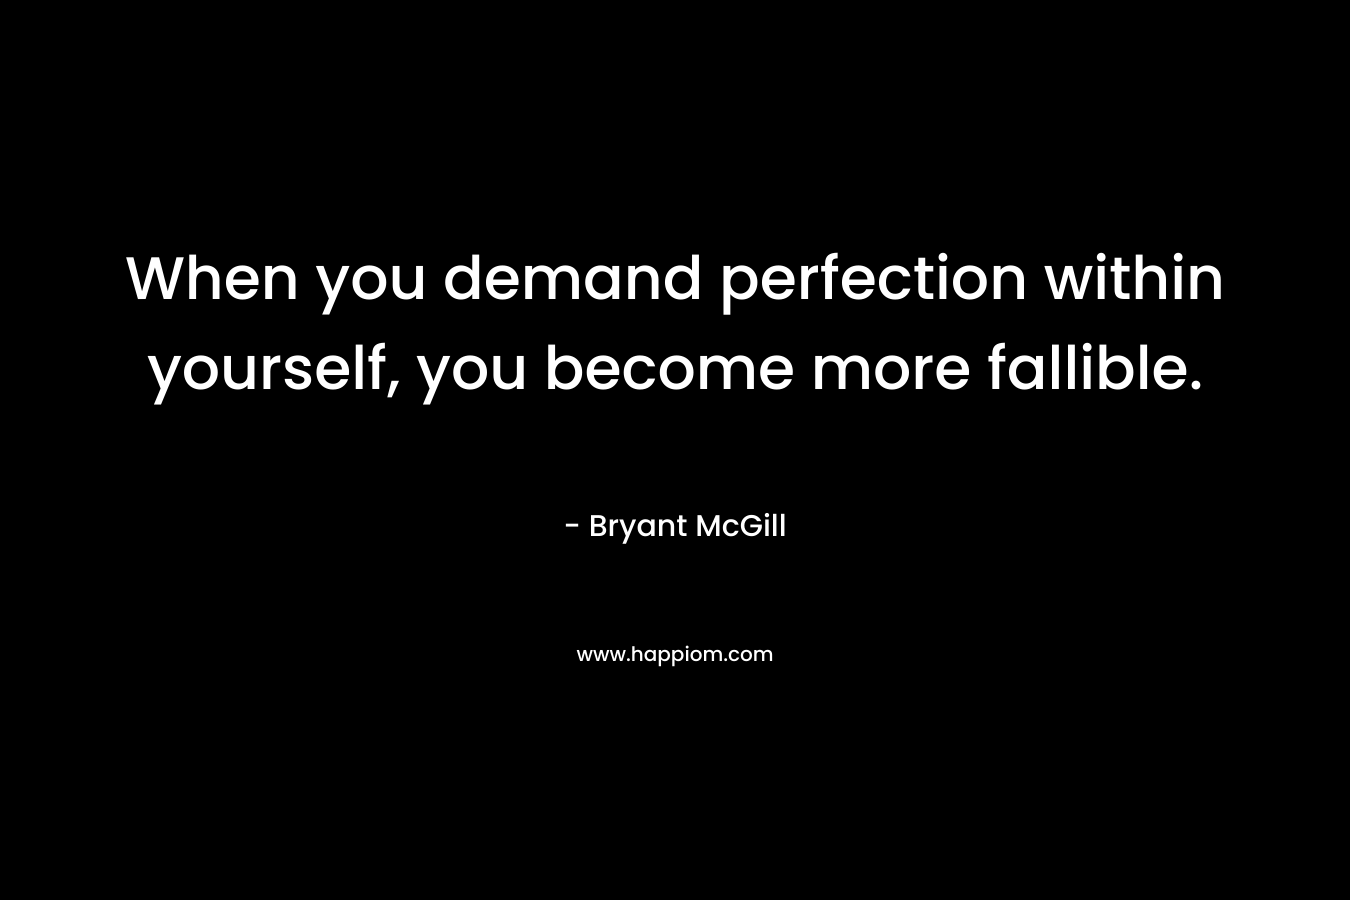 When you demand perfection within yourself, you become more fallible. – Bryant McGill